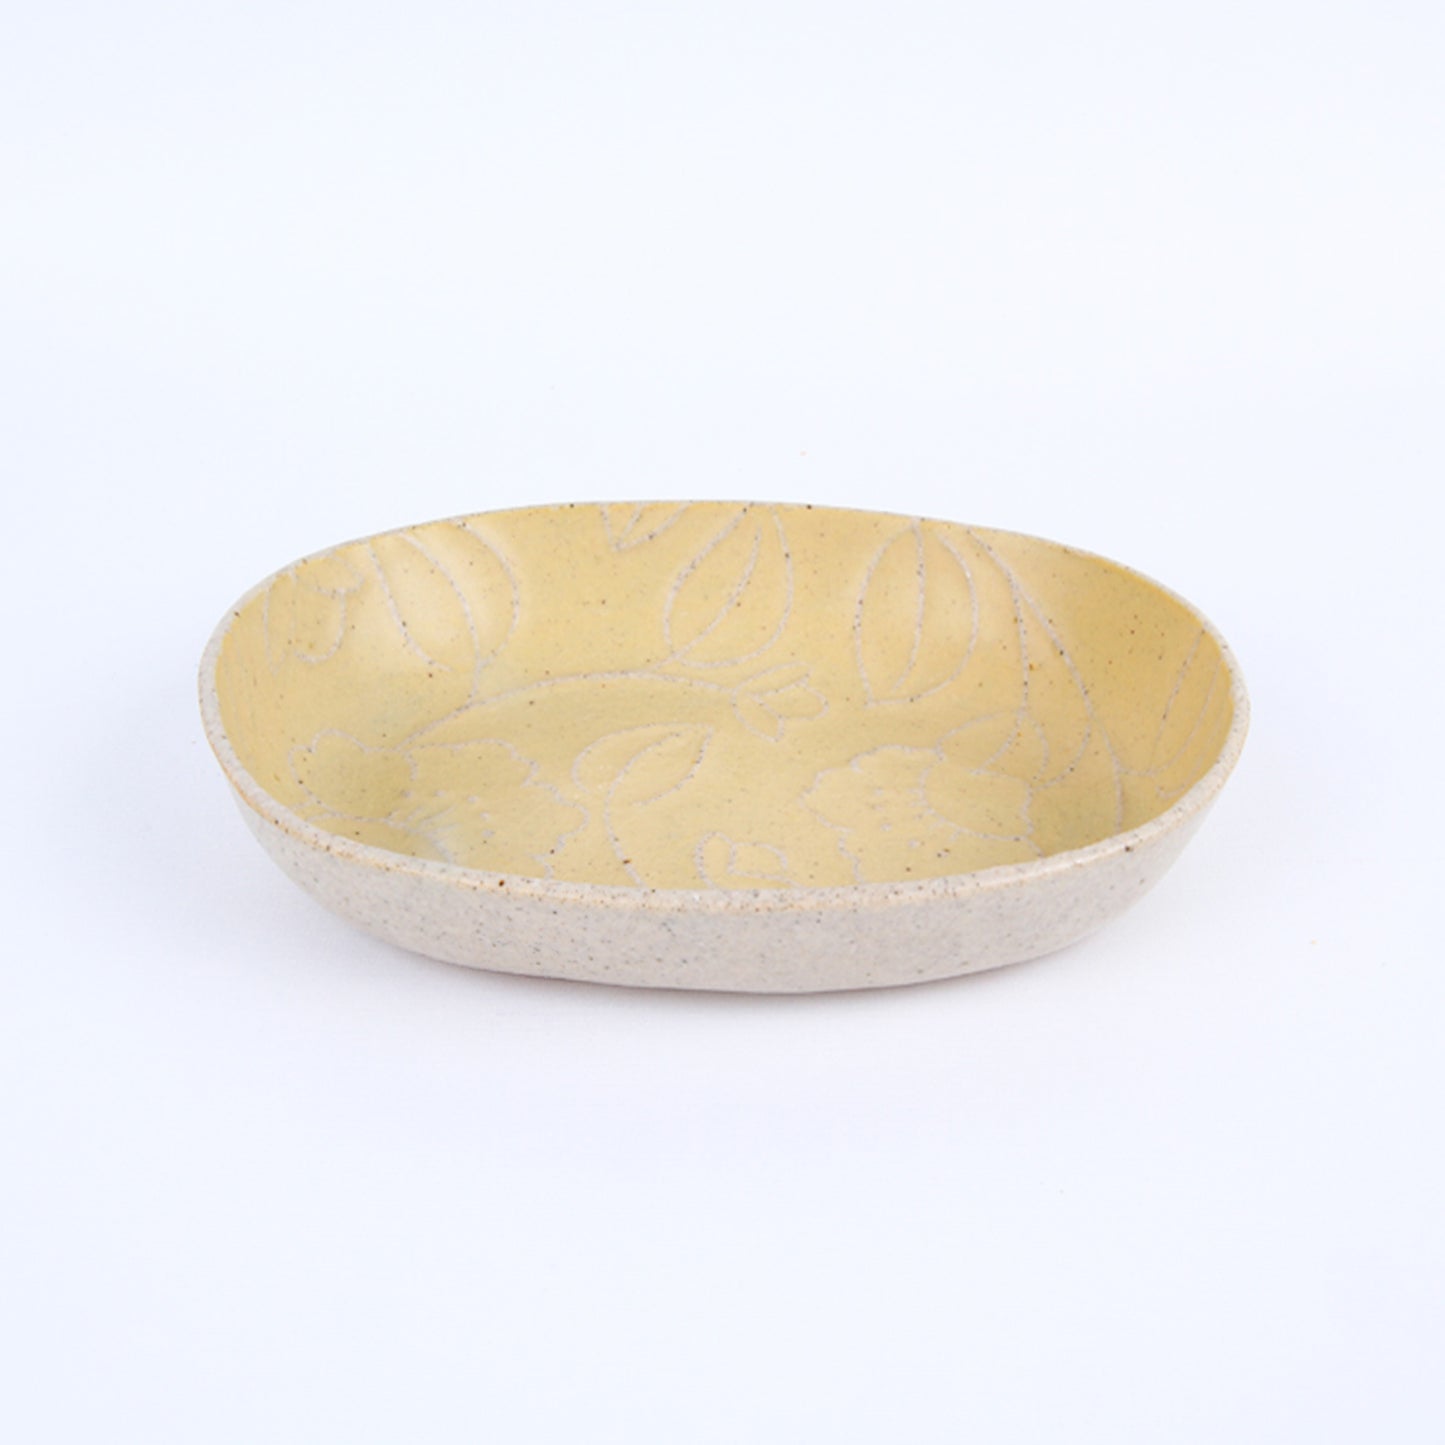 Refreshing Oval Plate 160mm (Pastel Green Color)